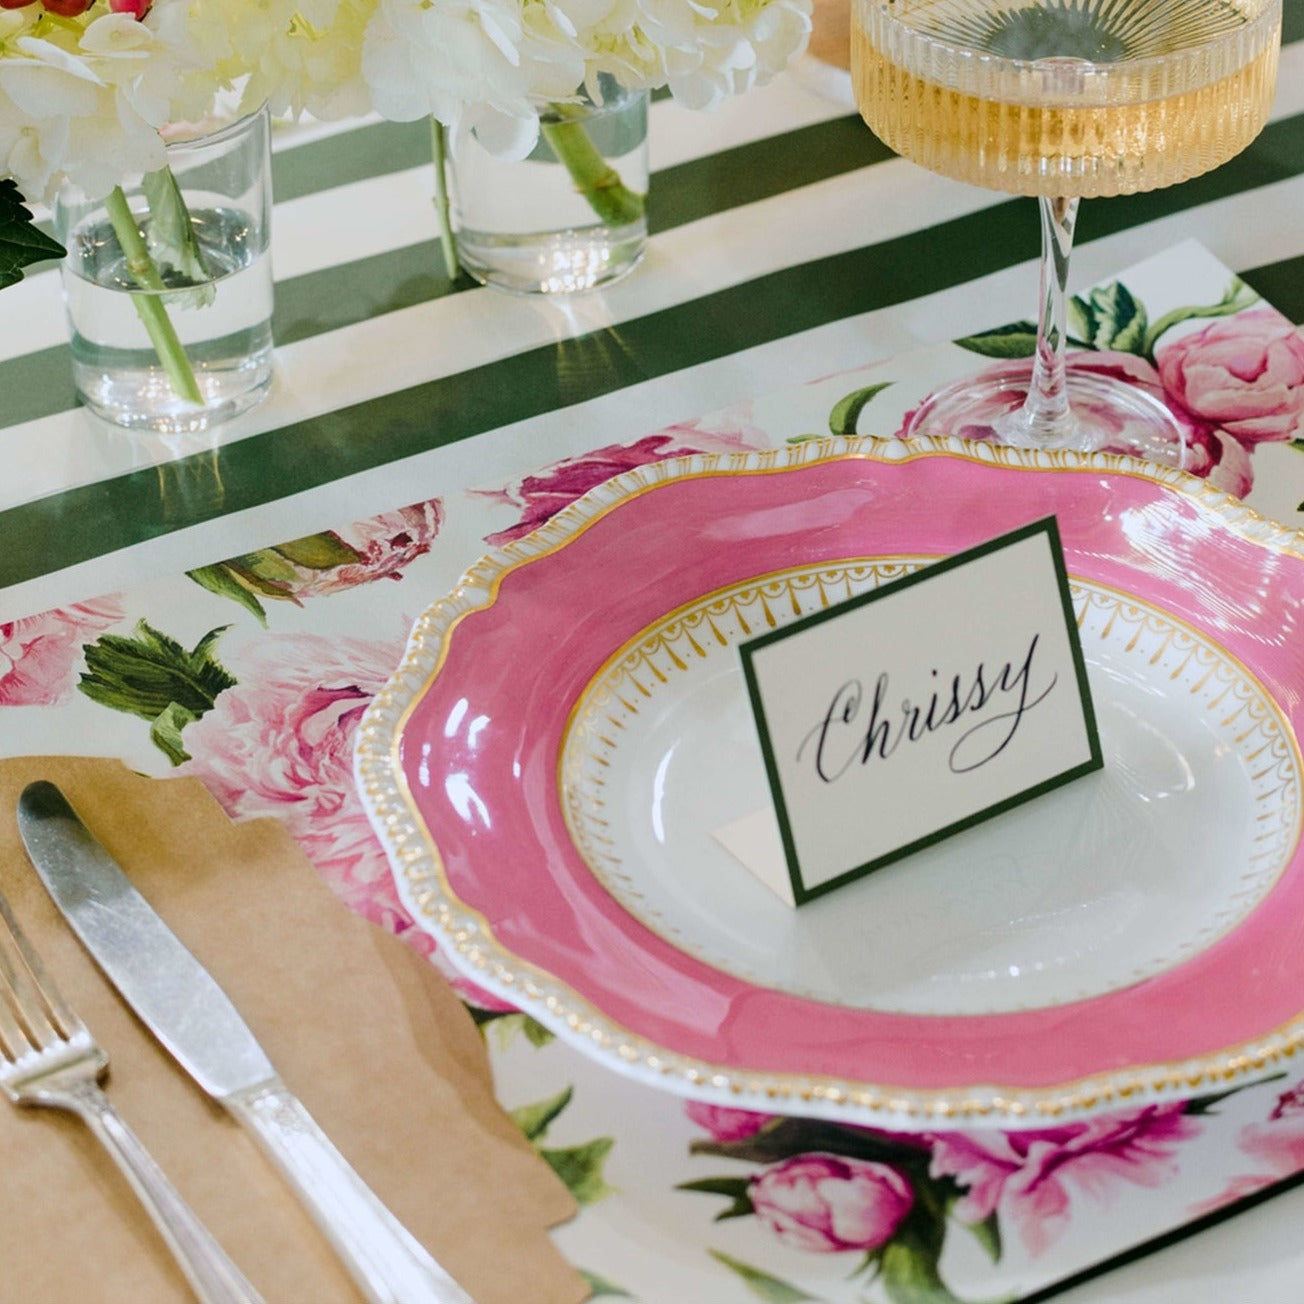 Showing a table setting using the Peonies in bloom placemat and green boarder place card.